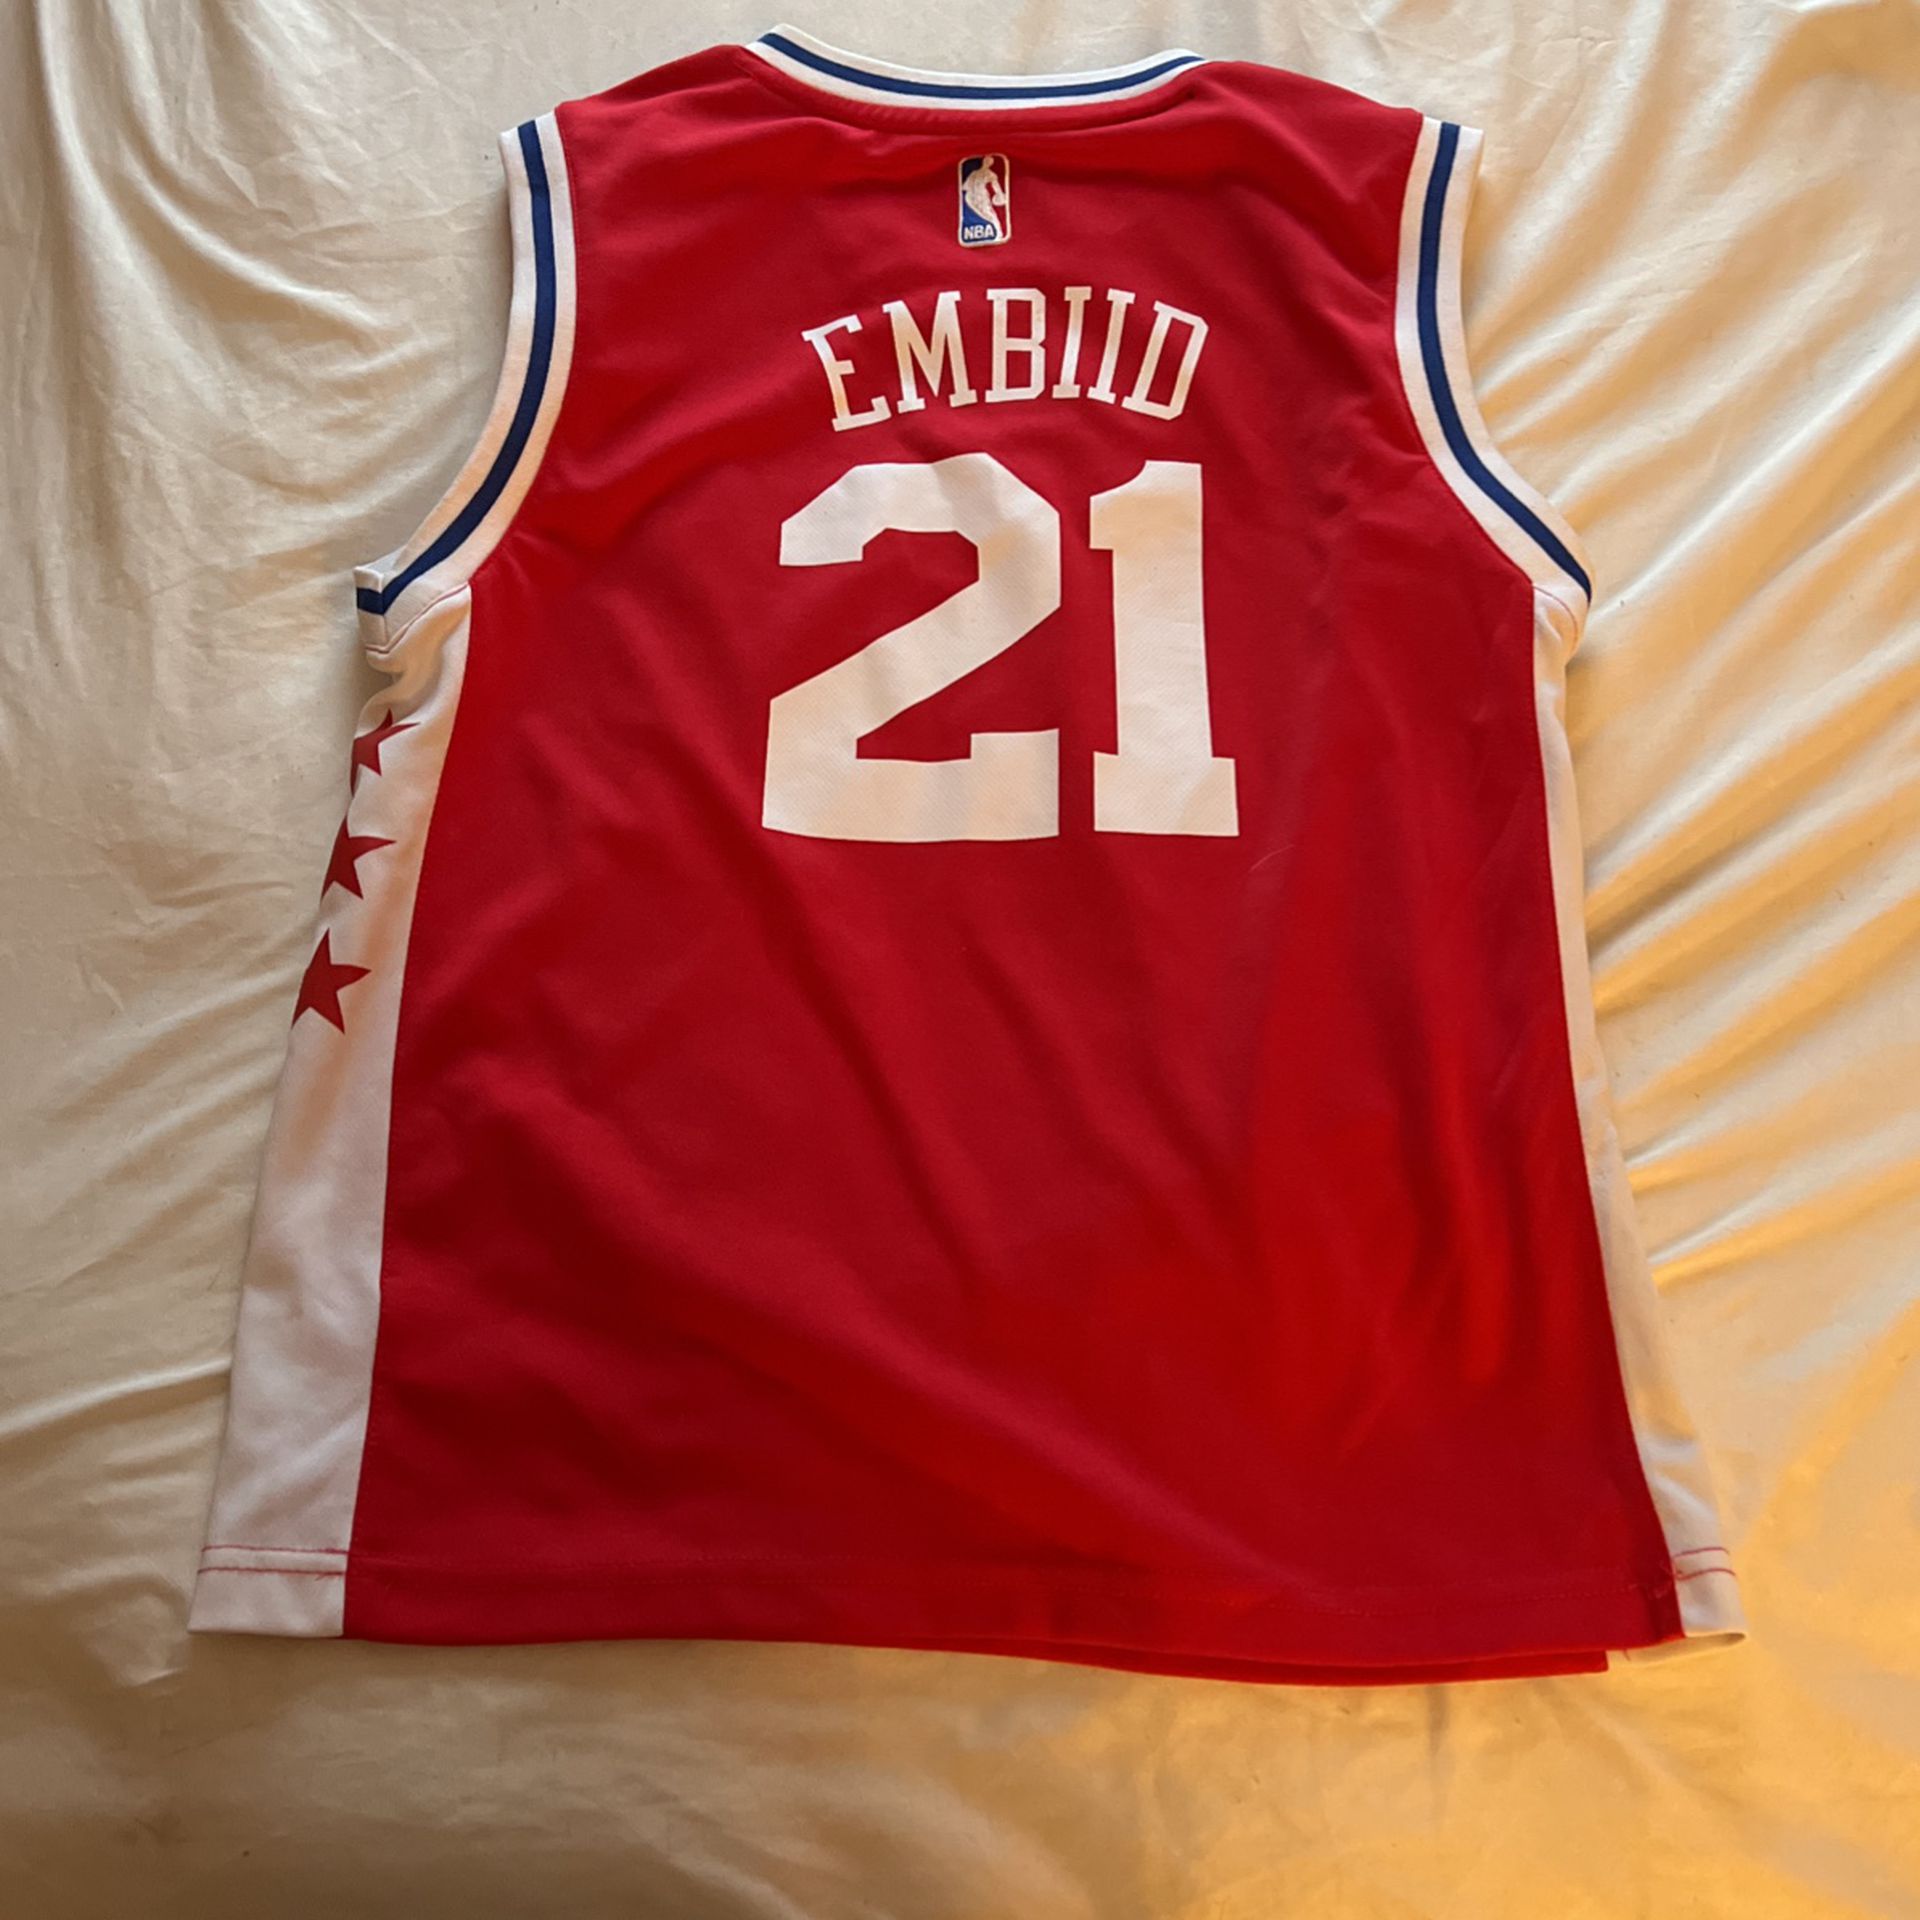 76ers Embiid Jersey 